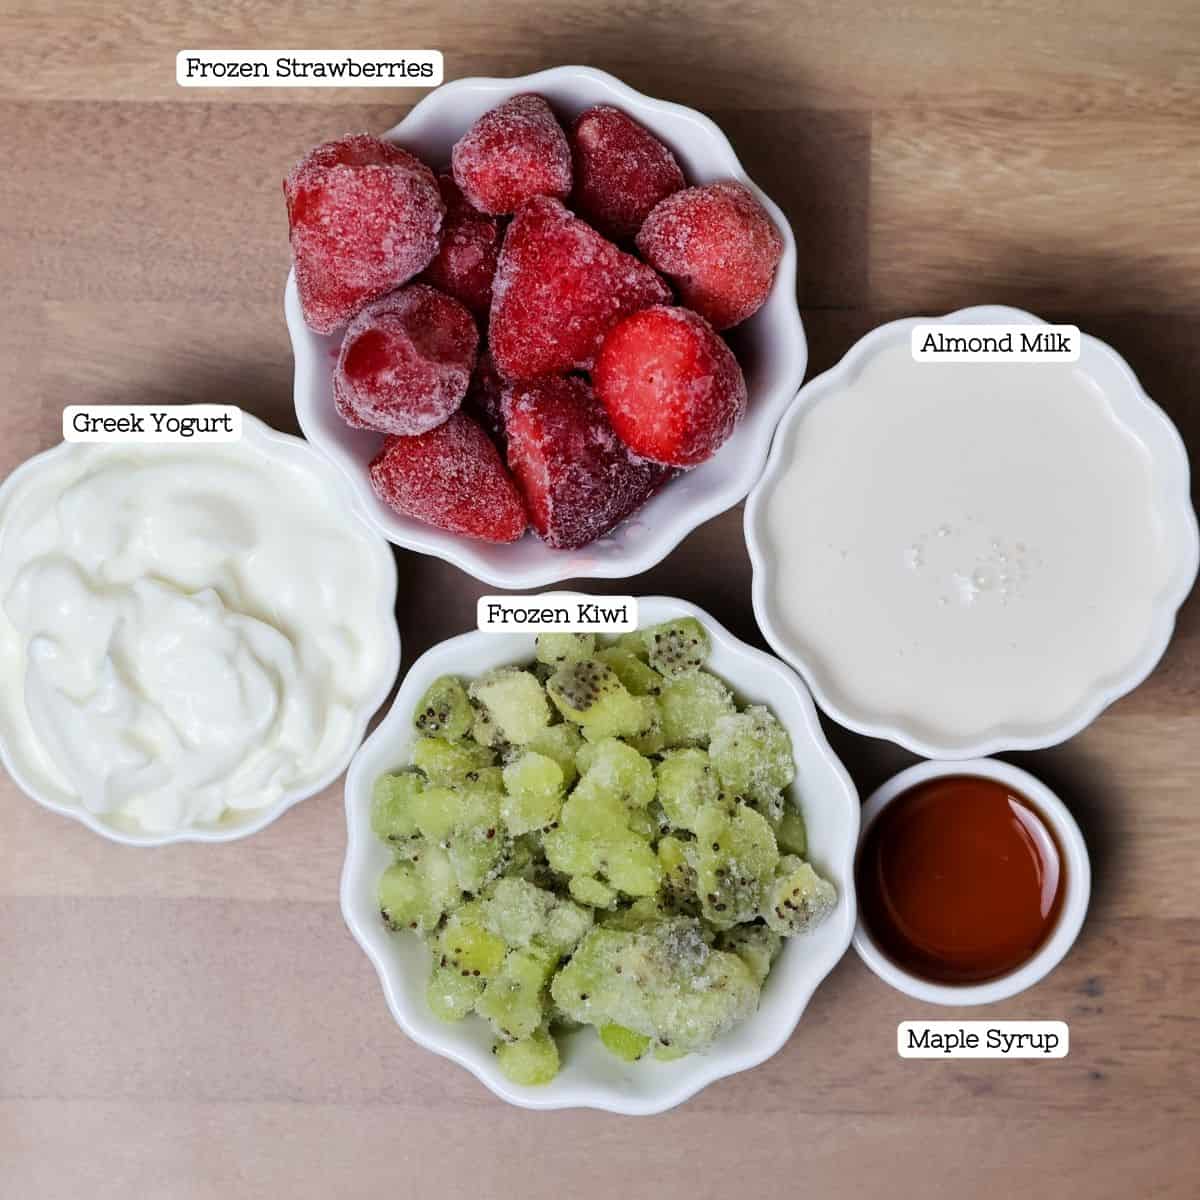 Overhead shot of fresh smoothie ingredients neatly arranged on a wooden surface. Clockwise from the top left, there’s a bowl of frosty frozen strawberries, a bowl of smooth almond milk, a small dish of rich maple syrup, and a bowl of vibrant frozen kiwi chunks. In the center, a bowl of creamy Greek yogurt anchors the composition, with labels for each ingredient.